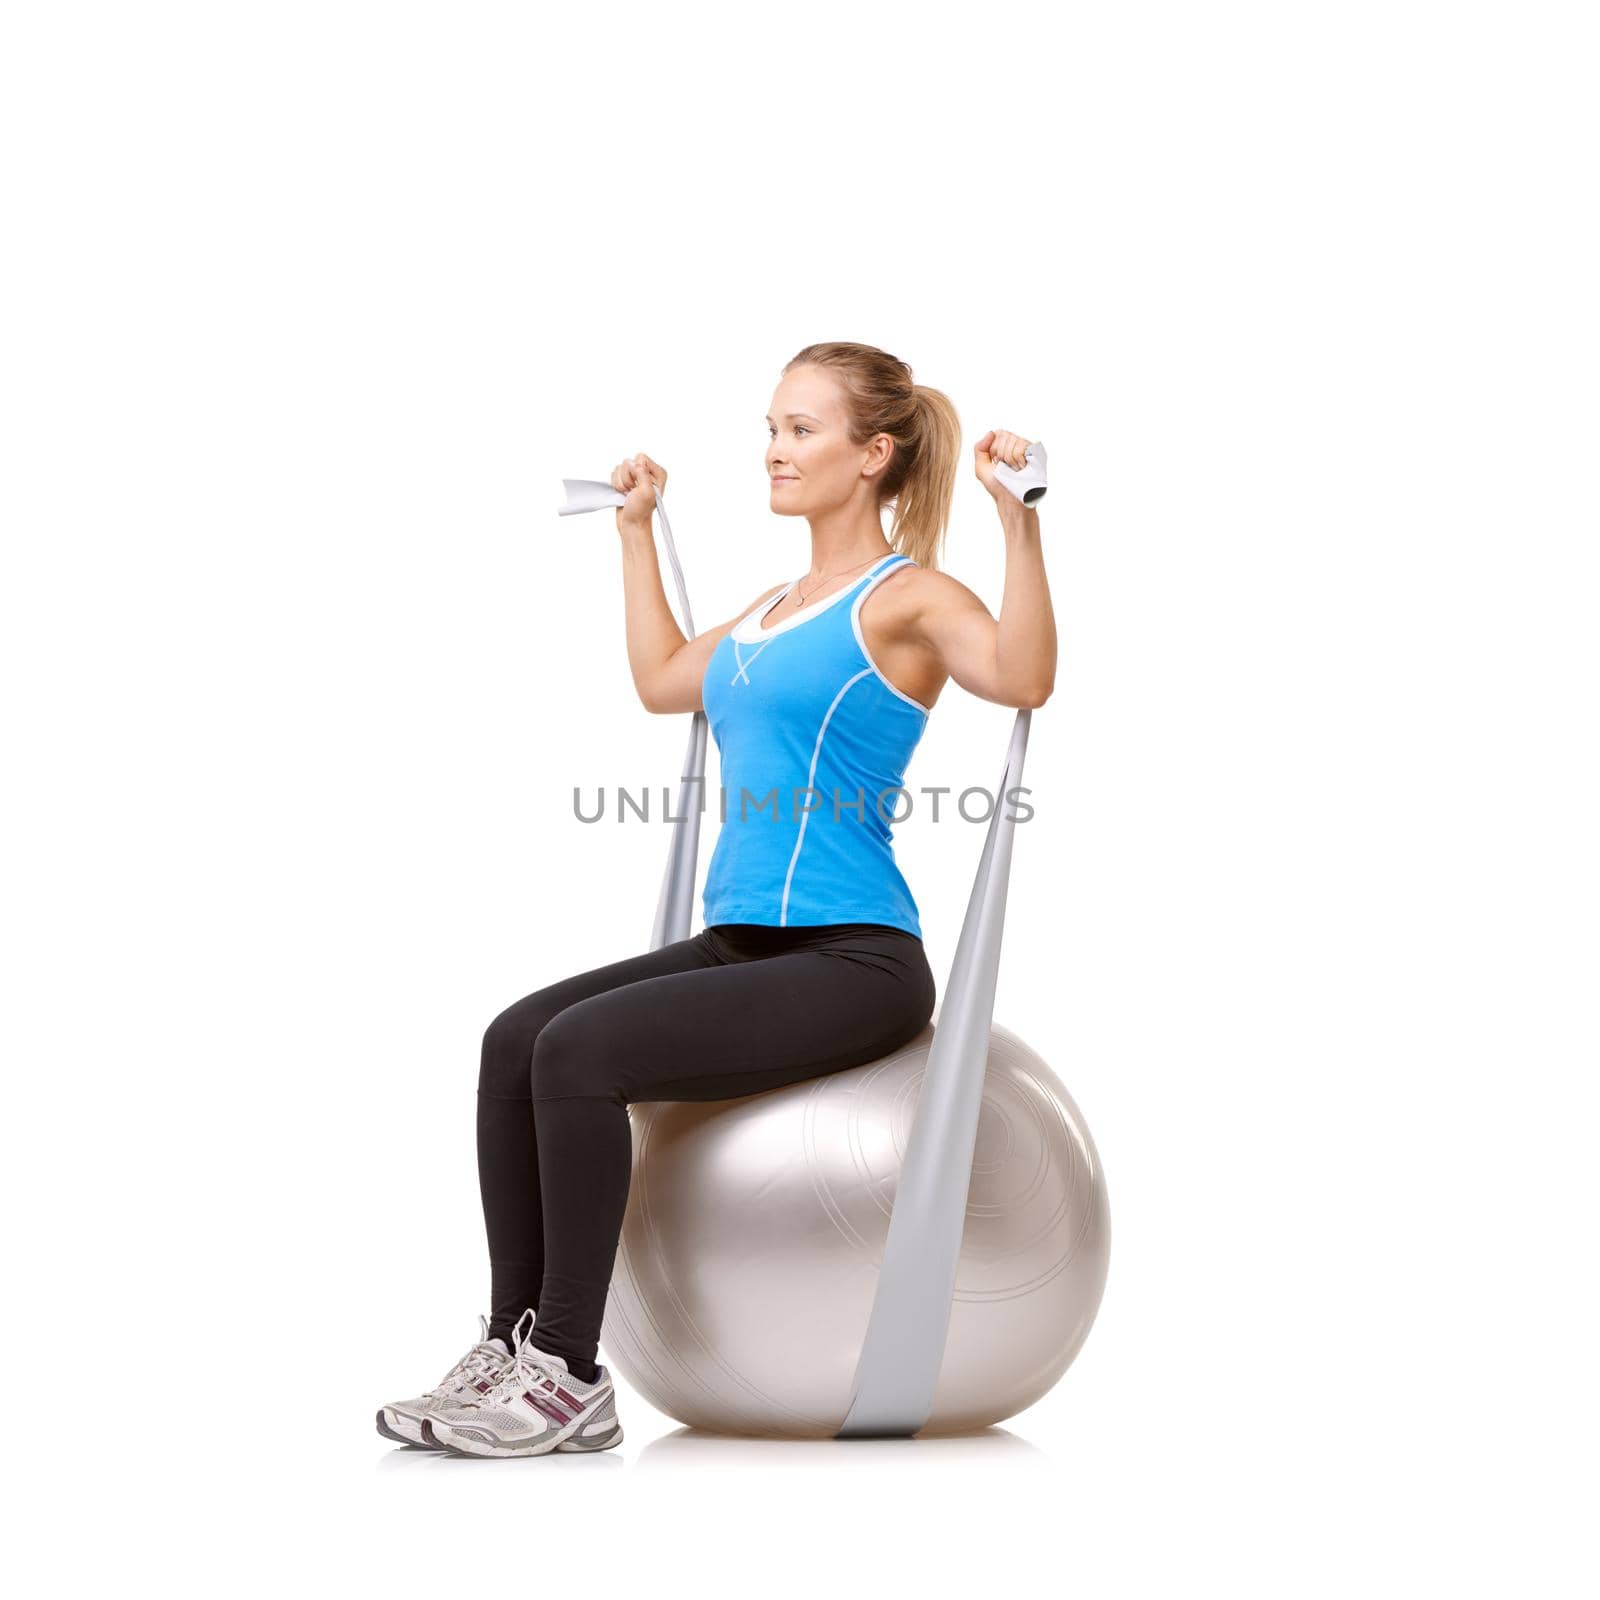 Total-body toning. A young woman sitting on an exercise ball while pulling a resistance band - profile. by YuriArcurs